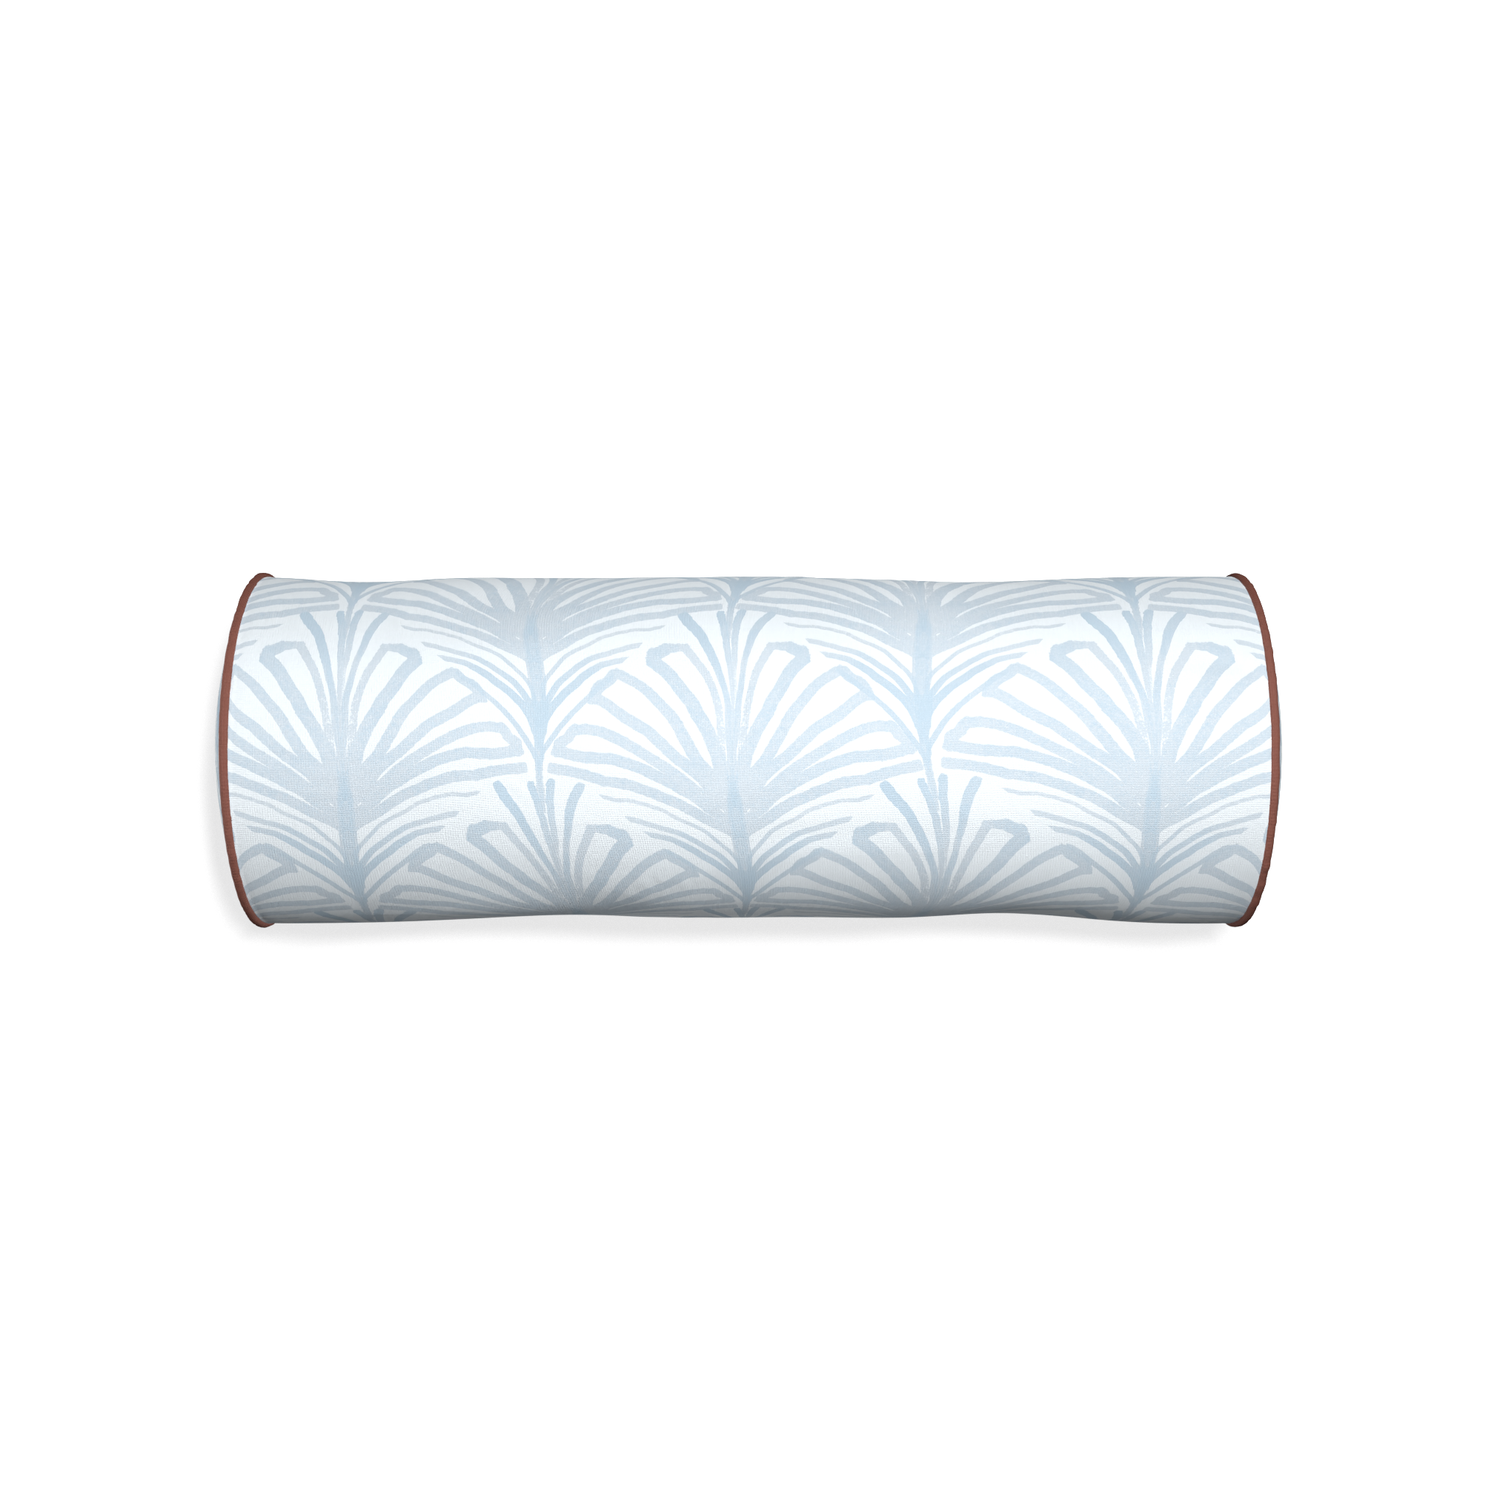 Bolster suzy sky custom pillow with w piping on white background